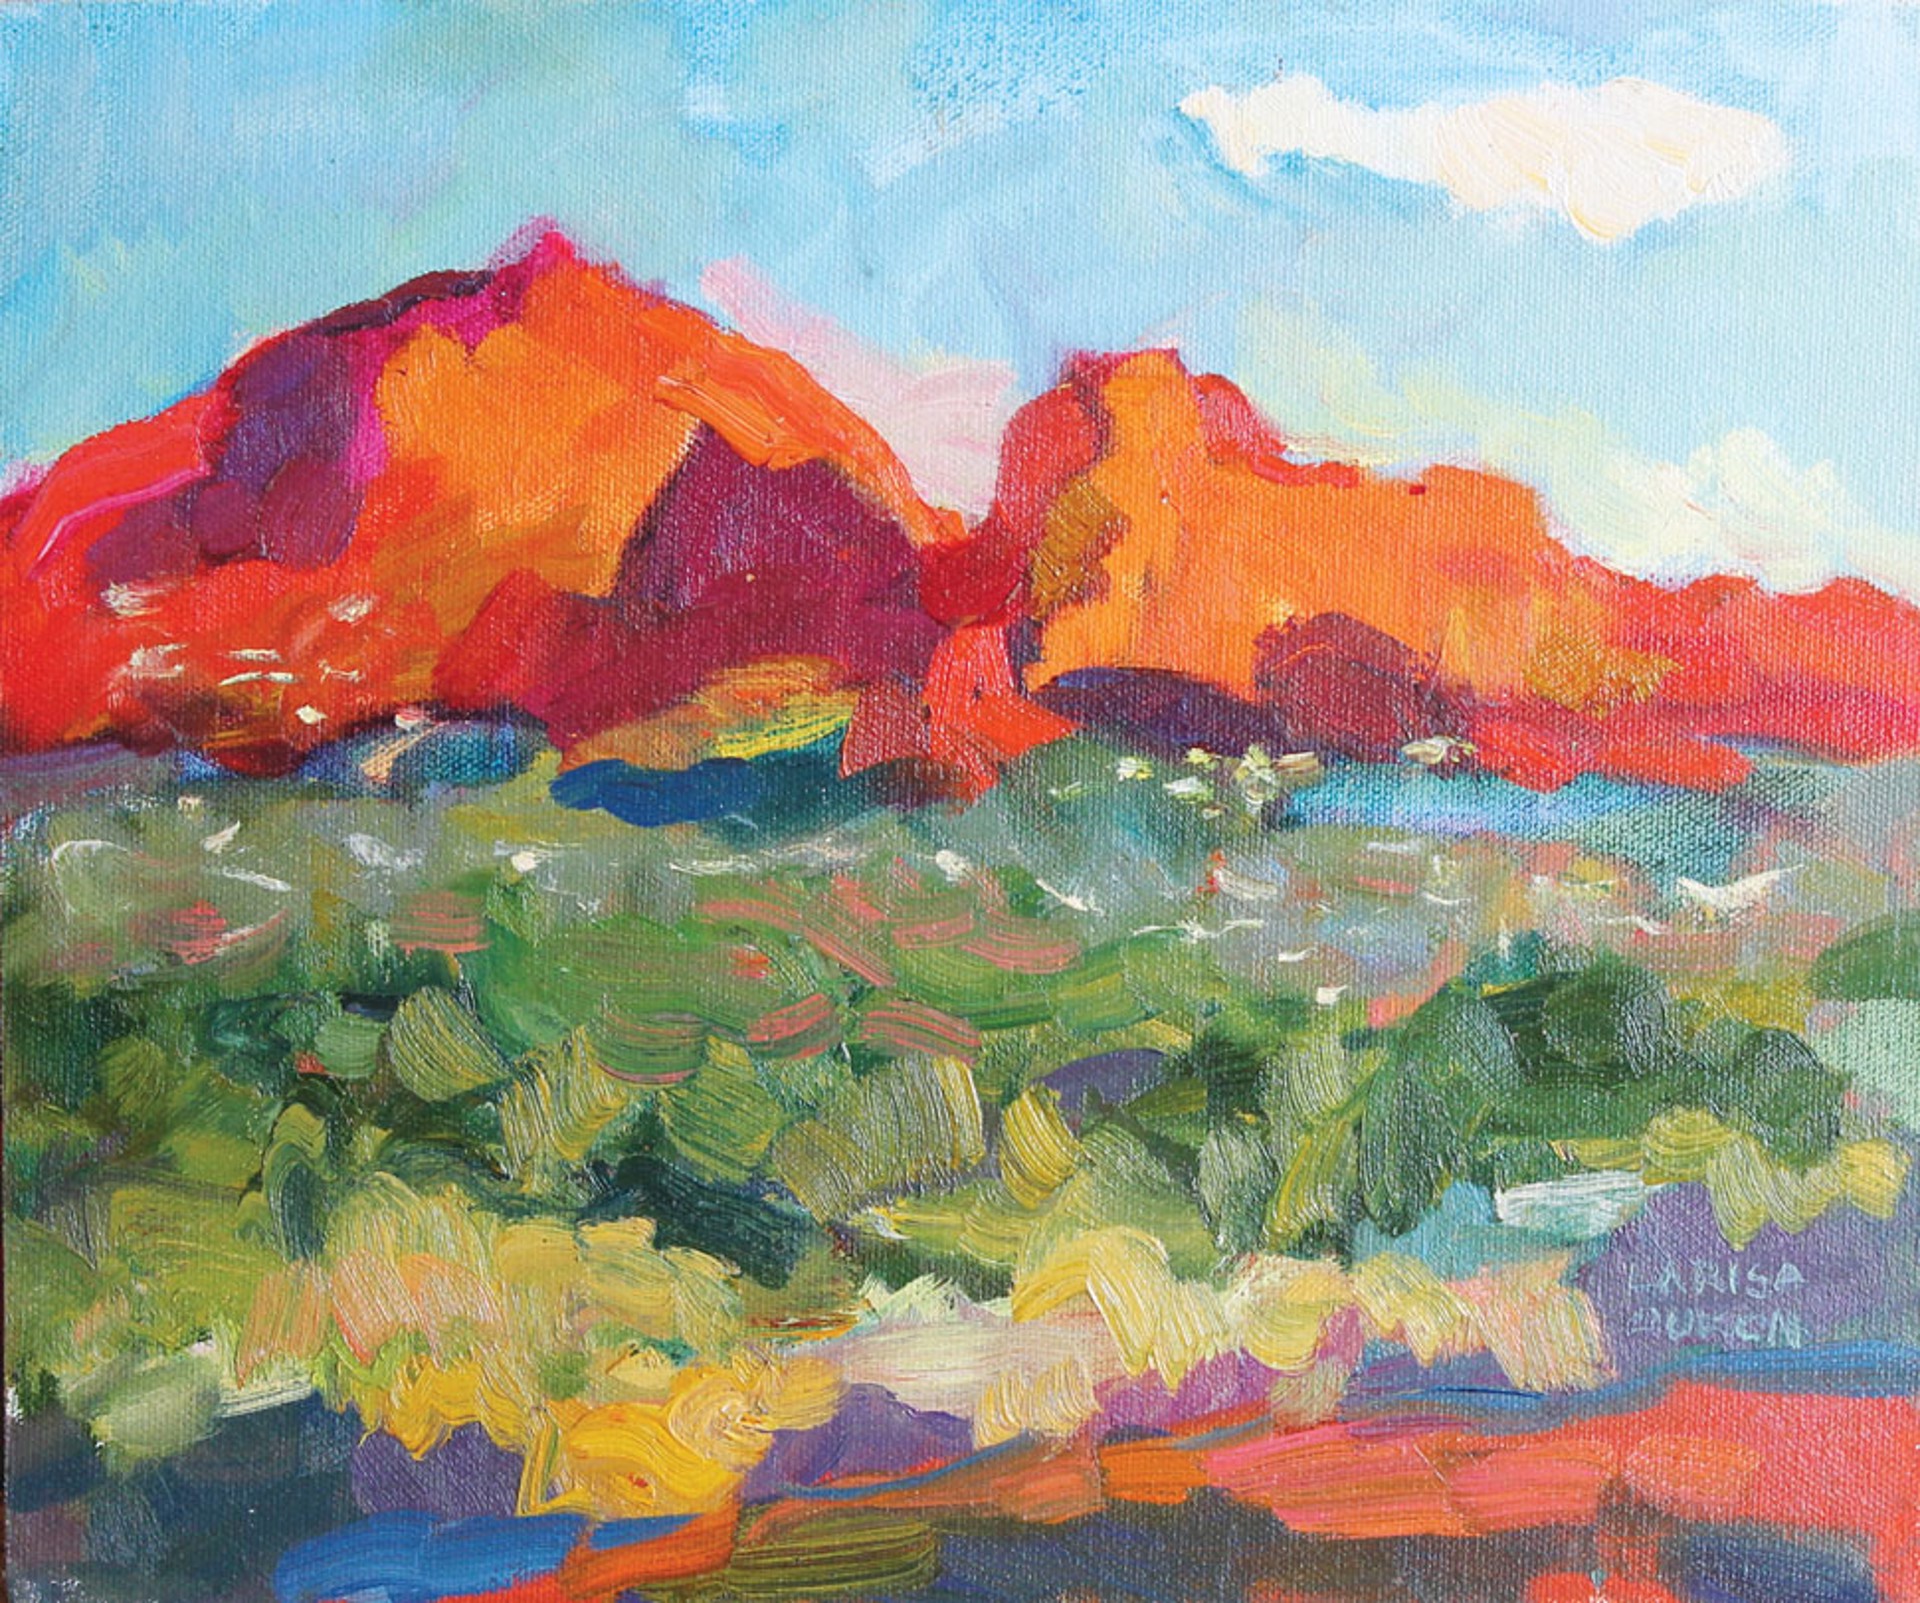 Afternoon in Sedona by Larisa Aukon